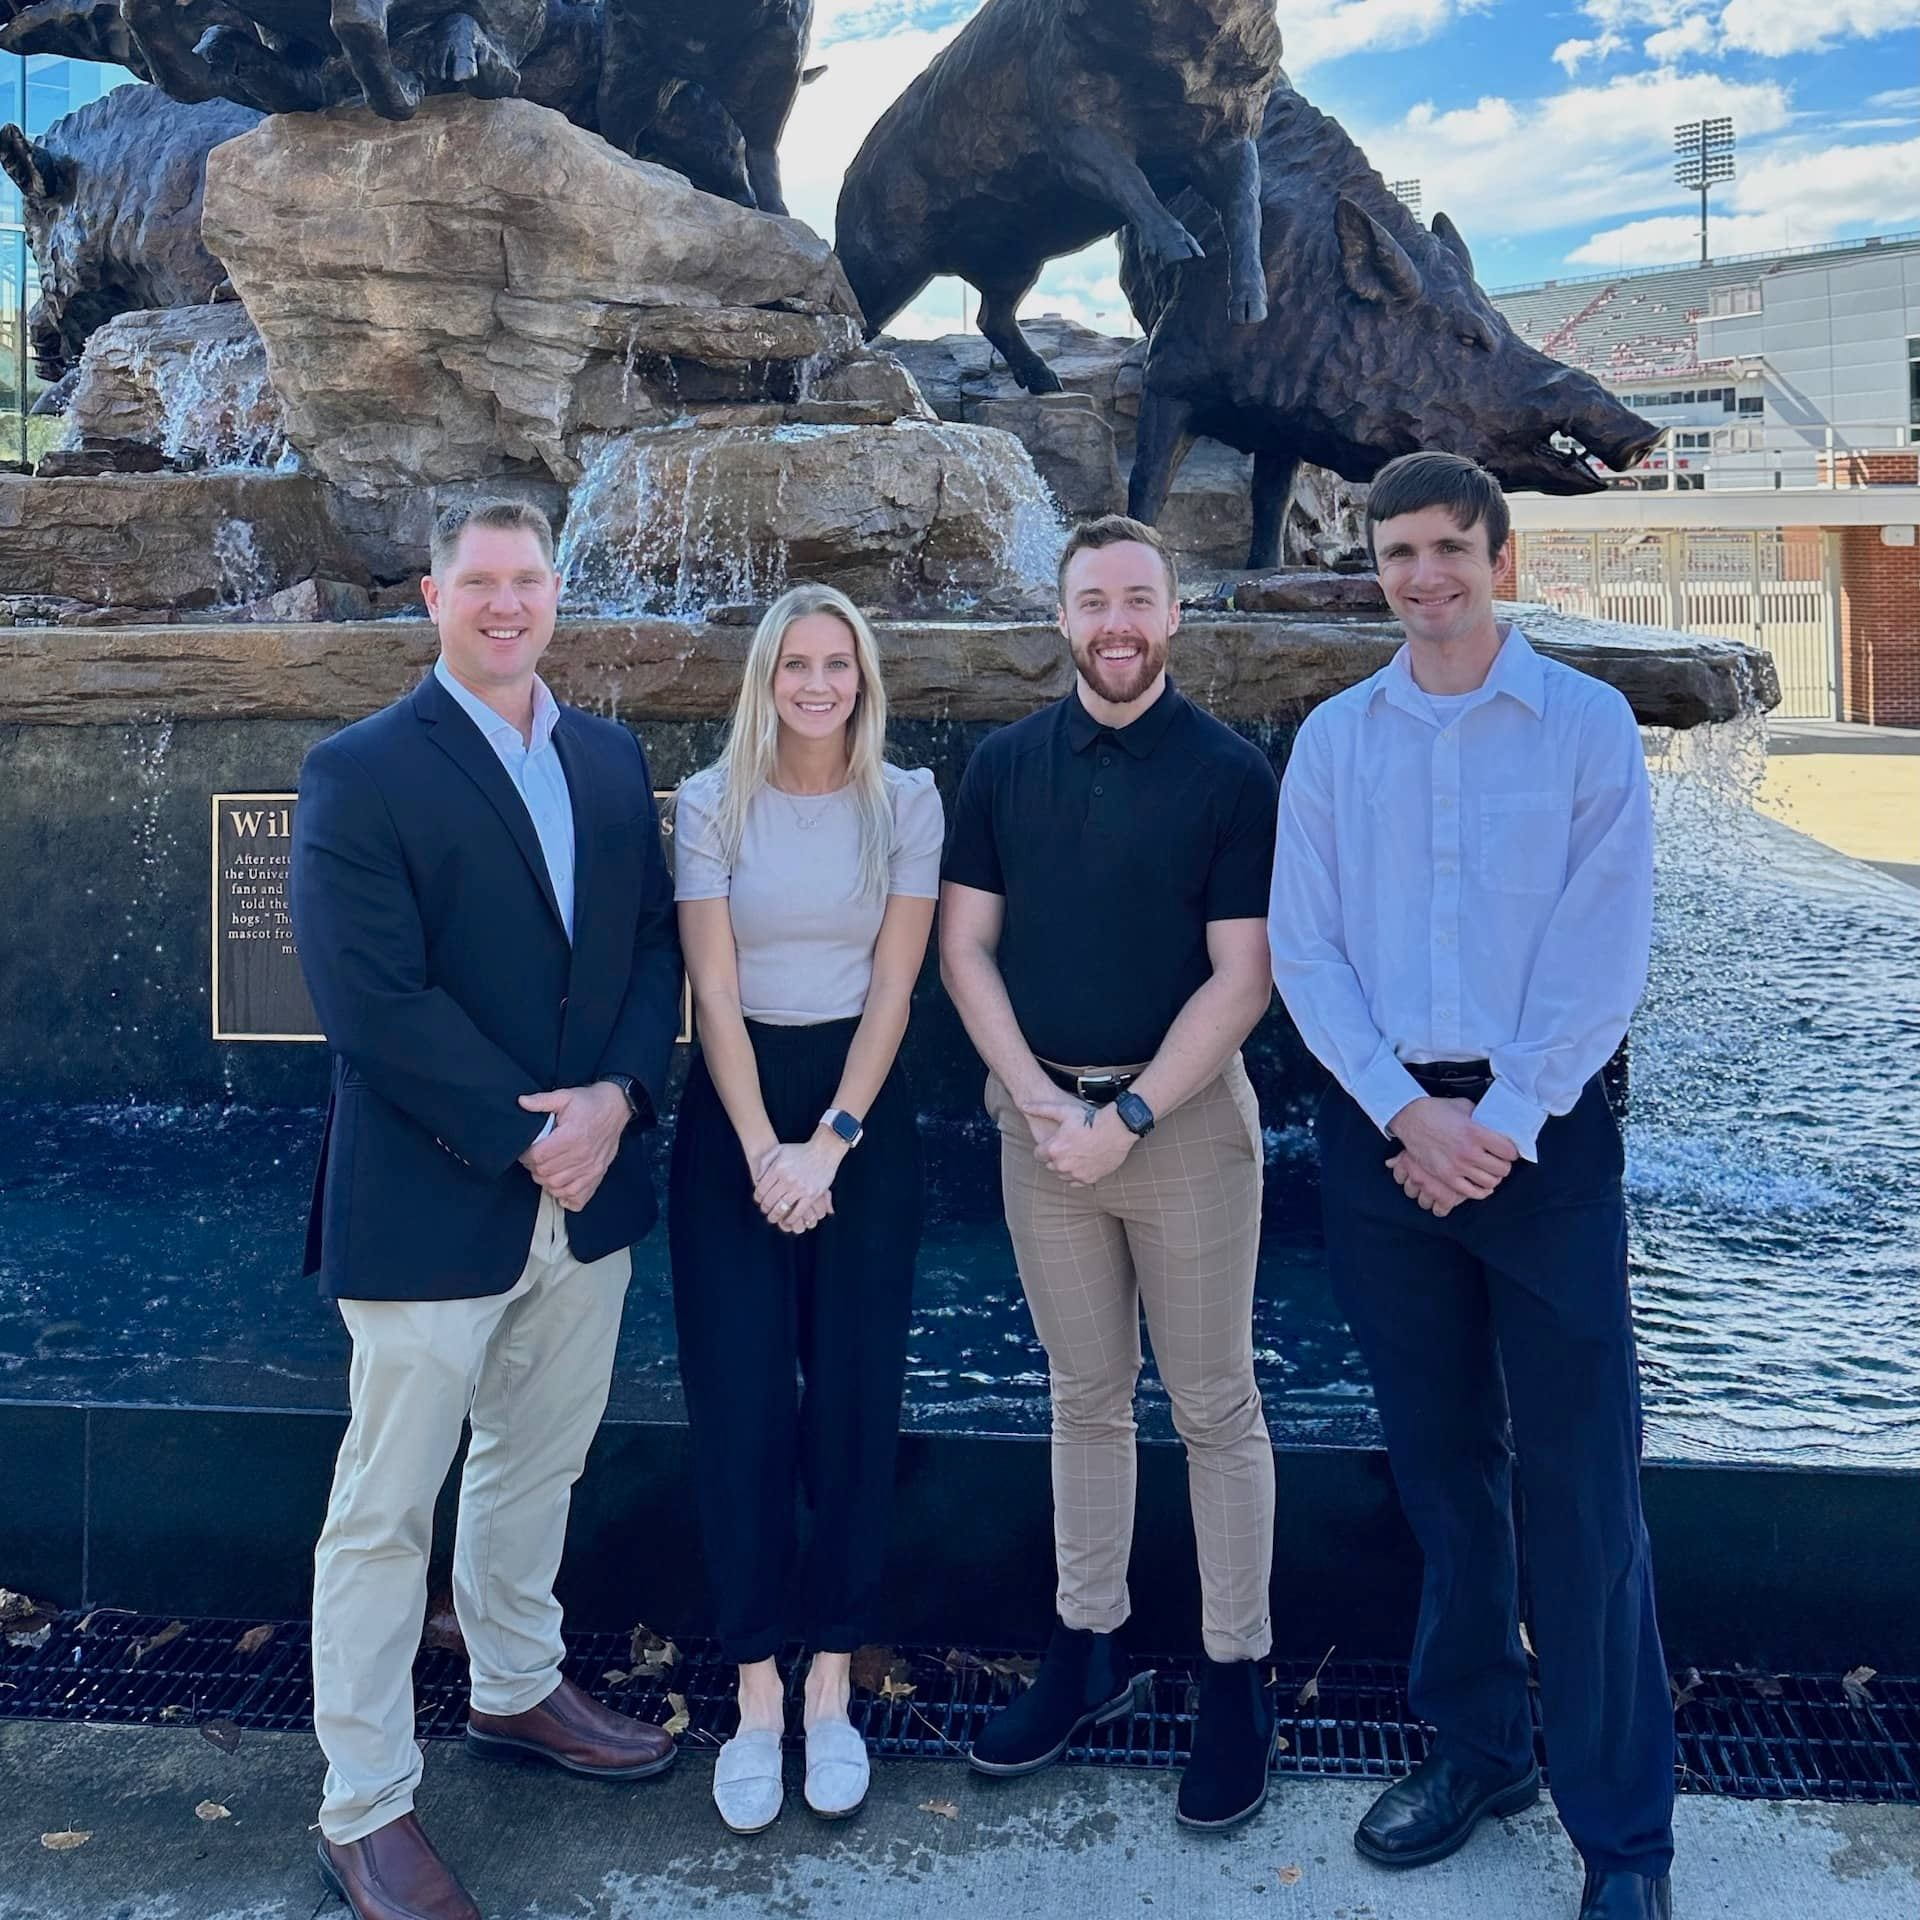 R.J. Elbin, Ph.D., an associate professor of Exercise Science and director of the University of Arkansas Office for Sport Concussion Research, stands with his research graduate assistants Kori Durfee, a Ph.D. candidate, and master's students Adam England and Gary Austin.